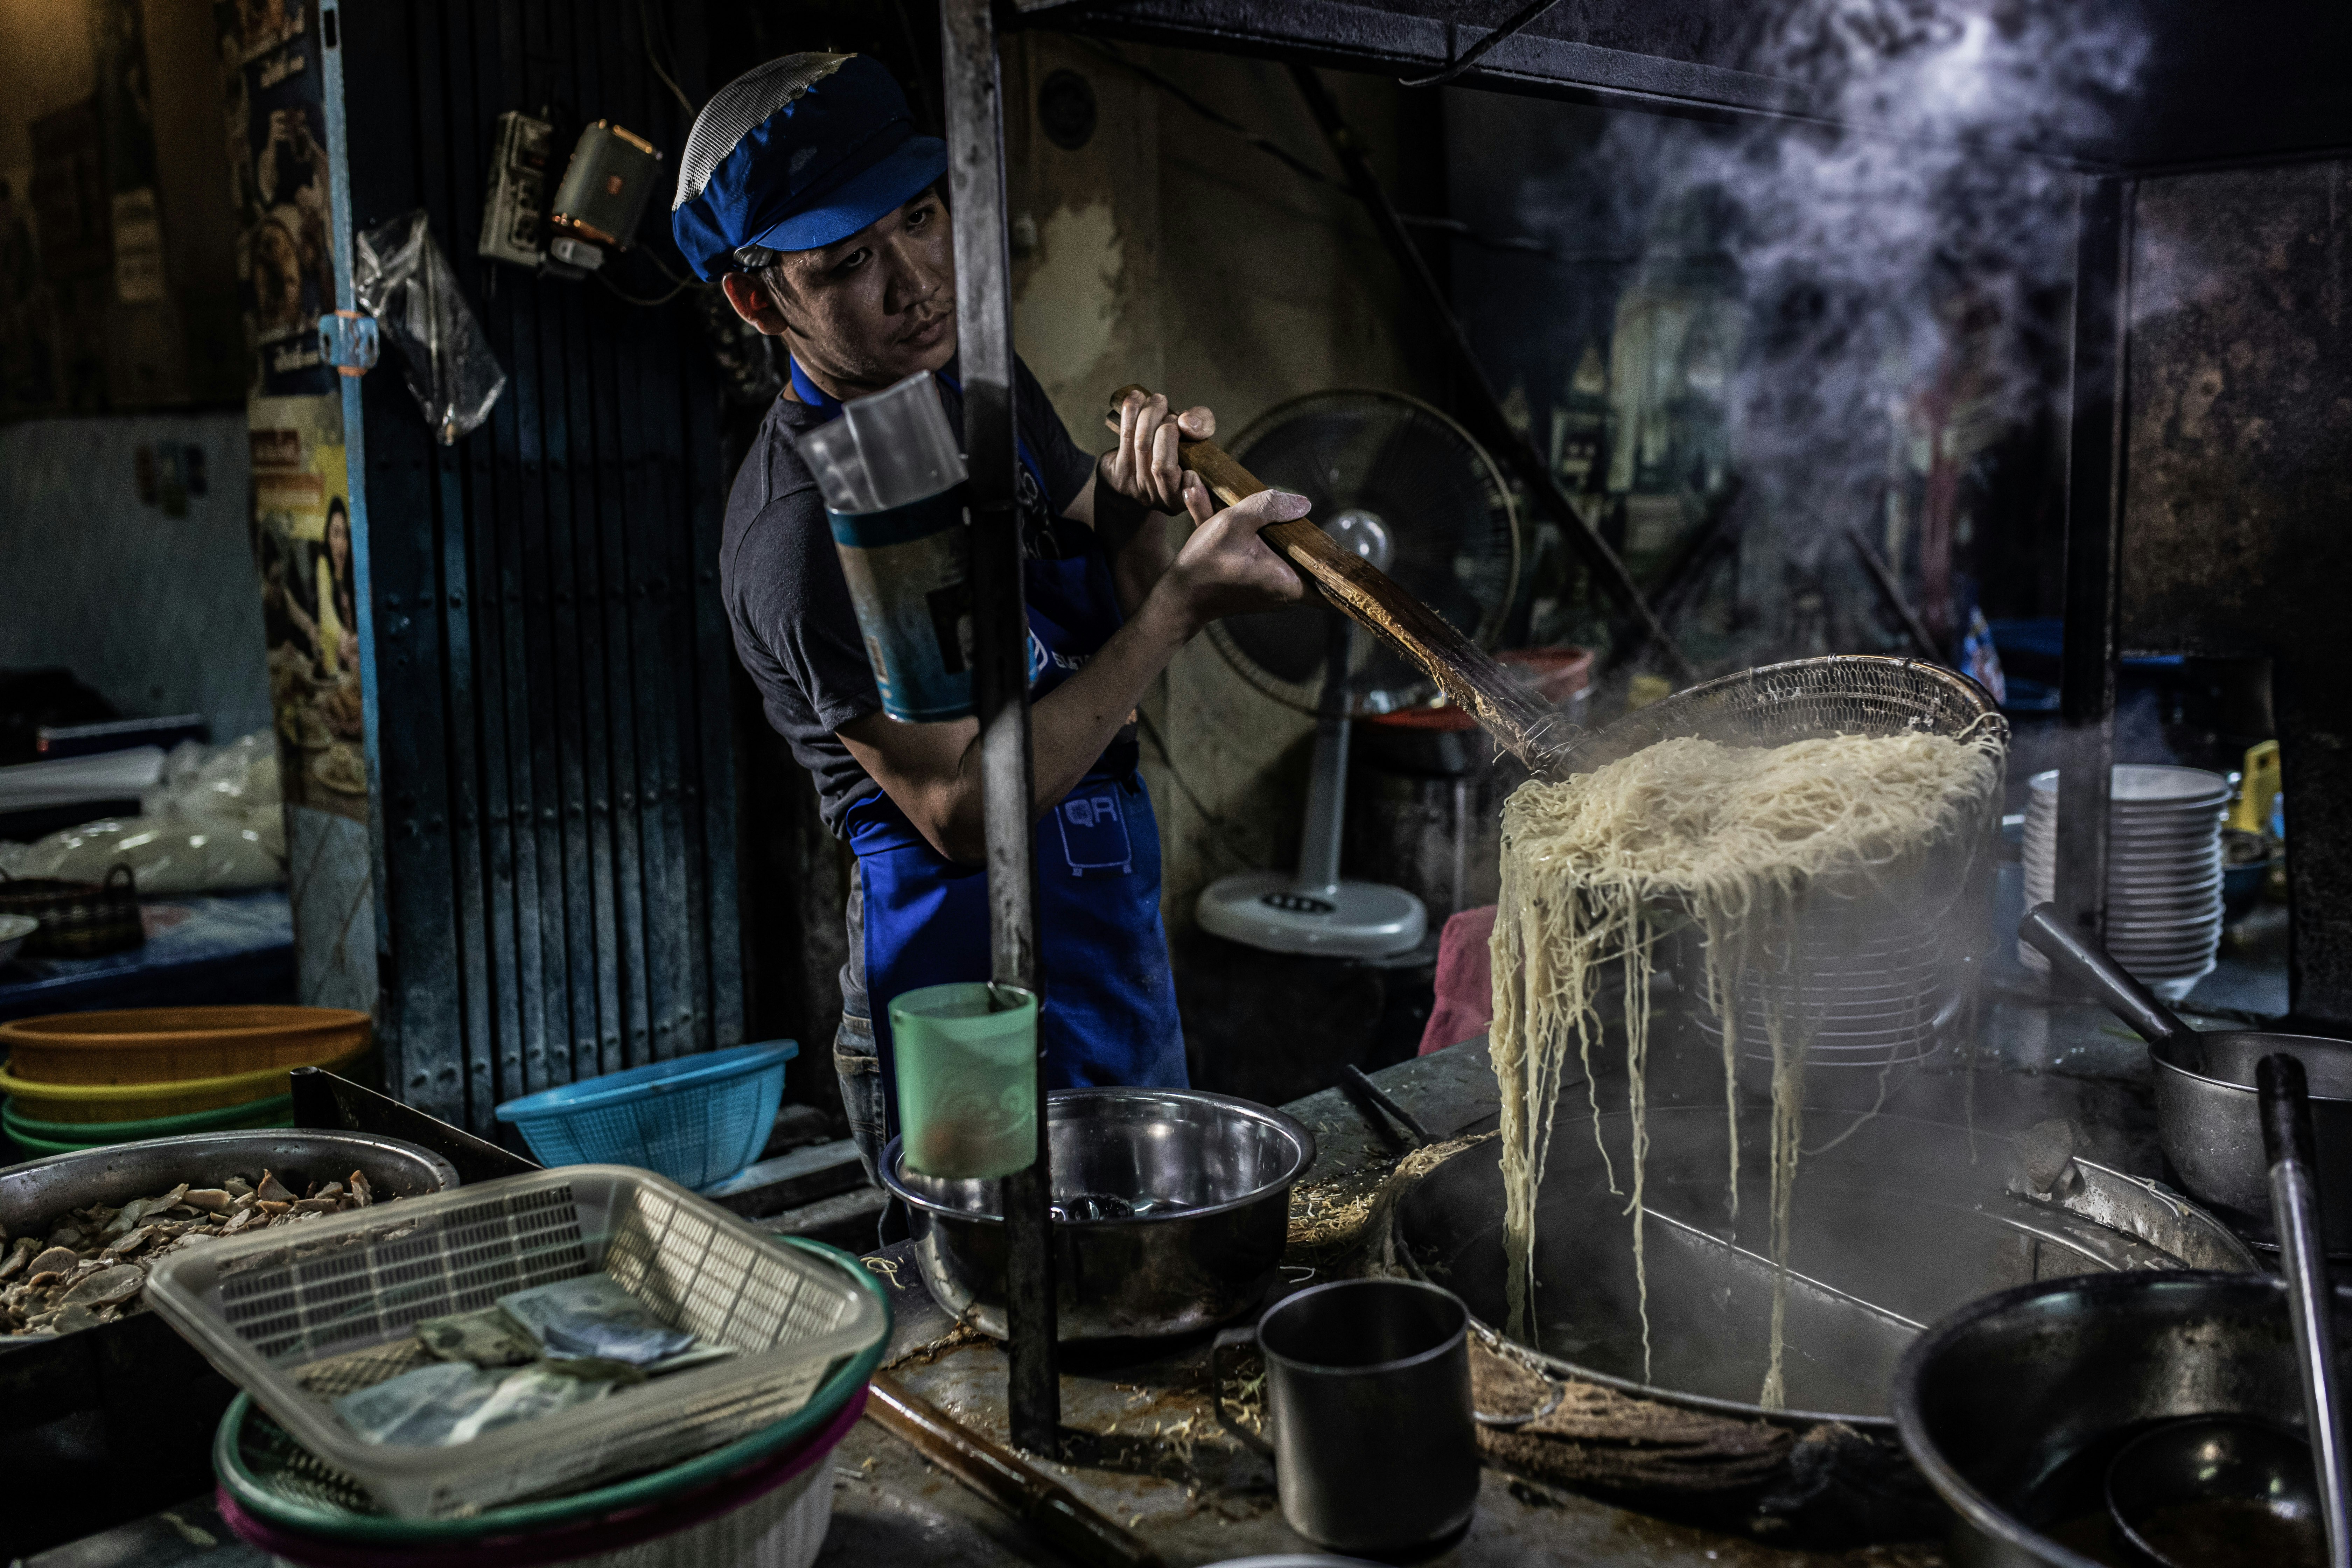 Cooking noodles on the streets of Bangkok's Chinatown.